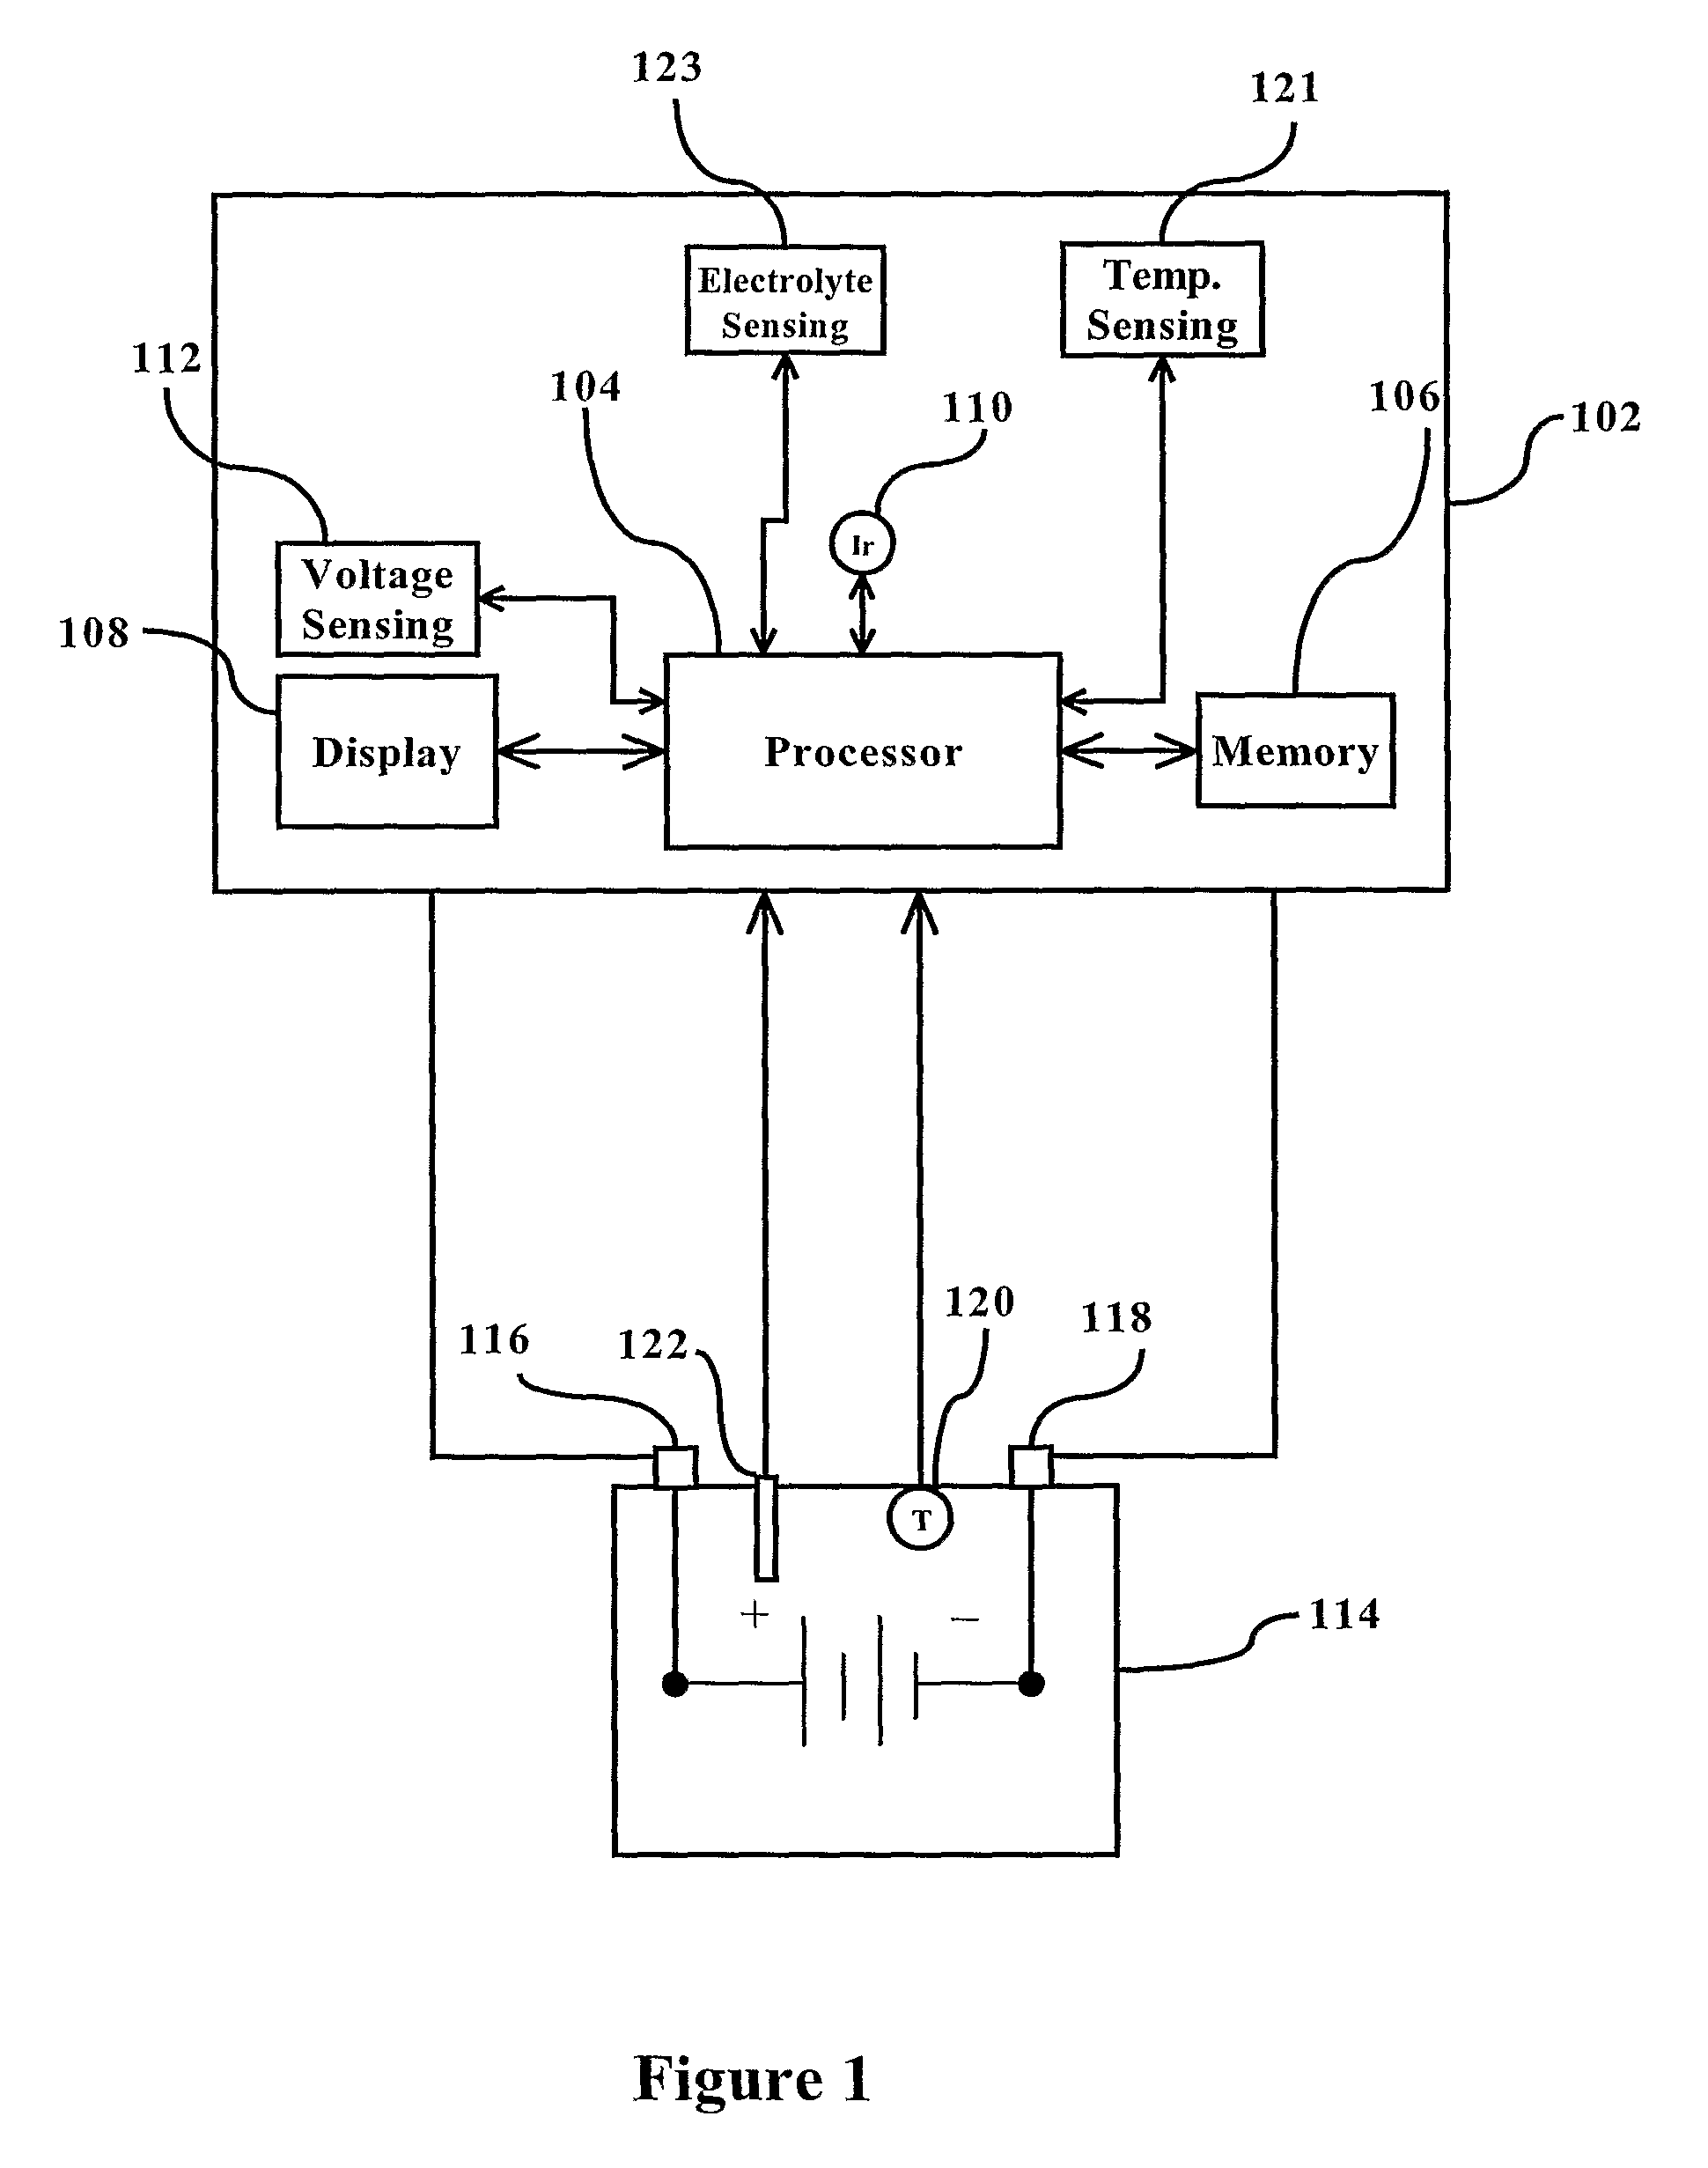 Device and Method For Monitoring Life History and Controlling Maintenance of Industrial Batteries